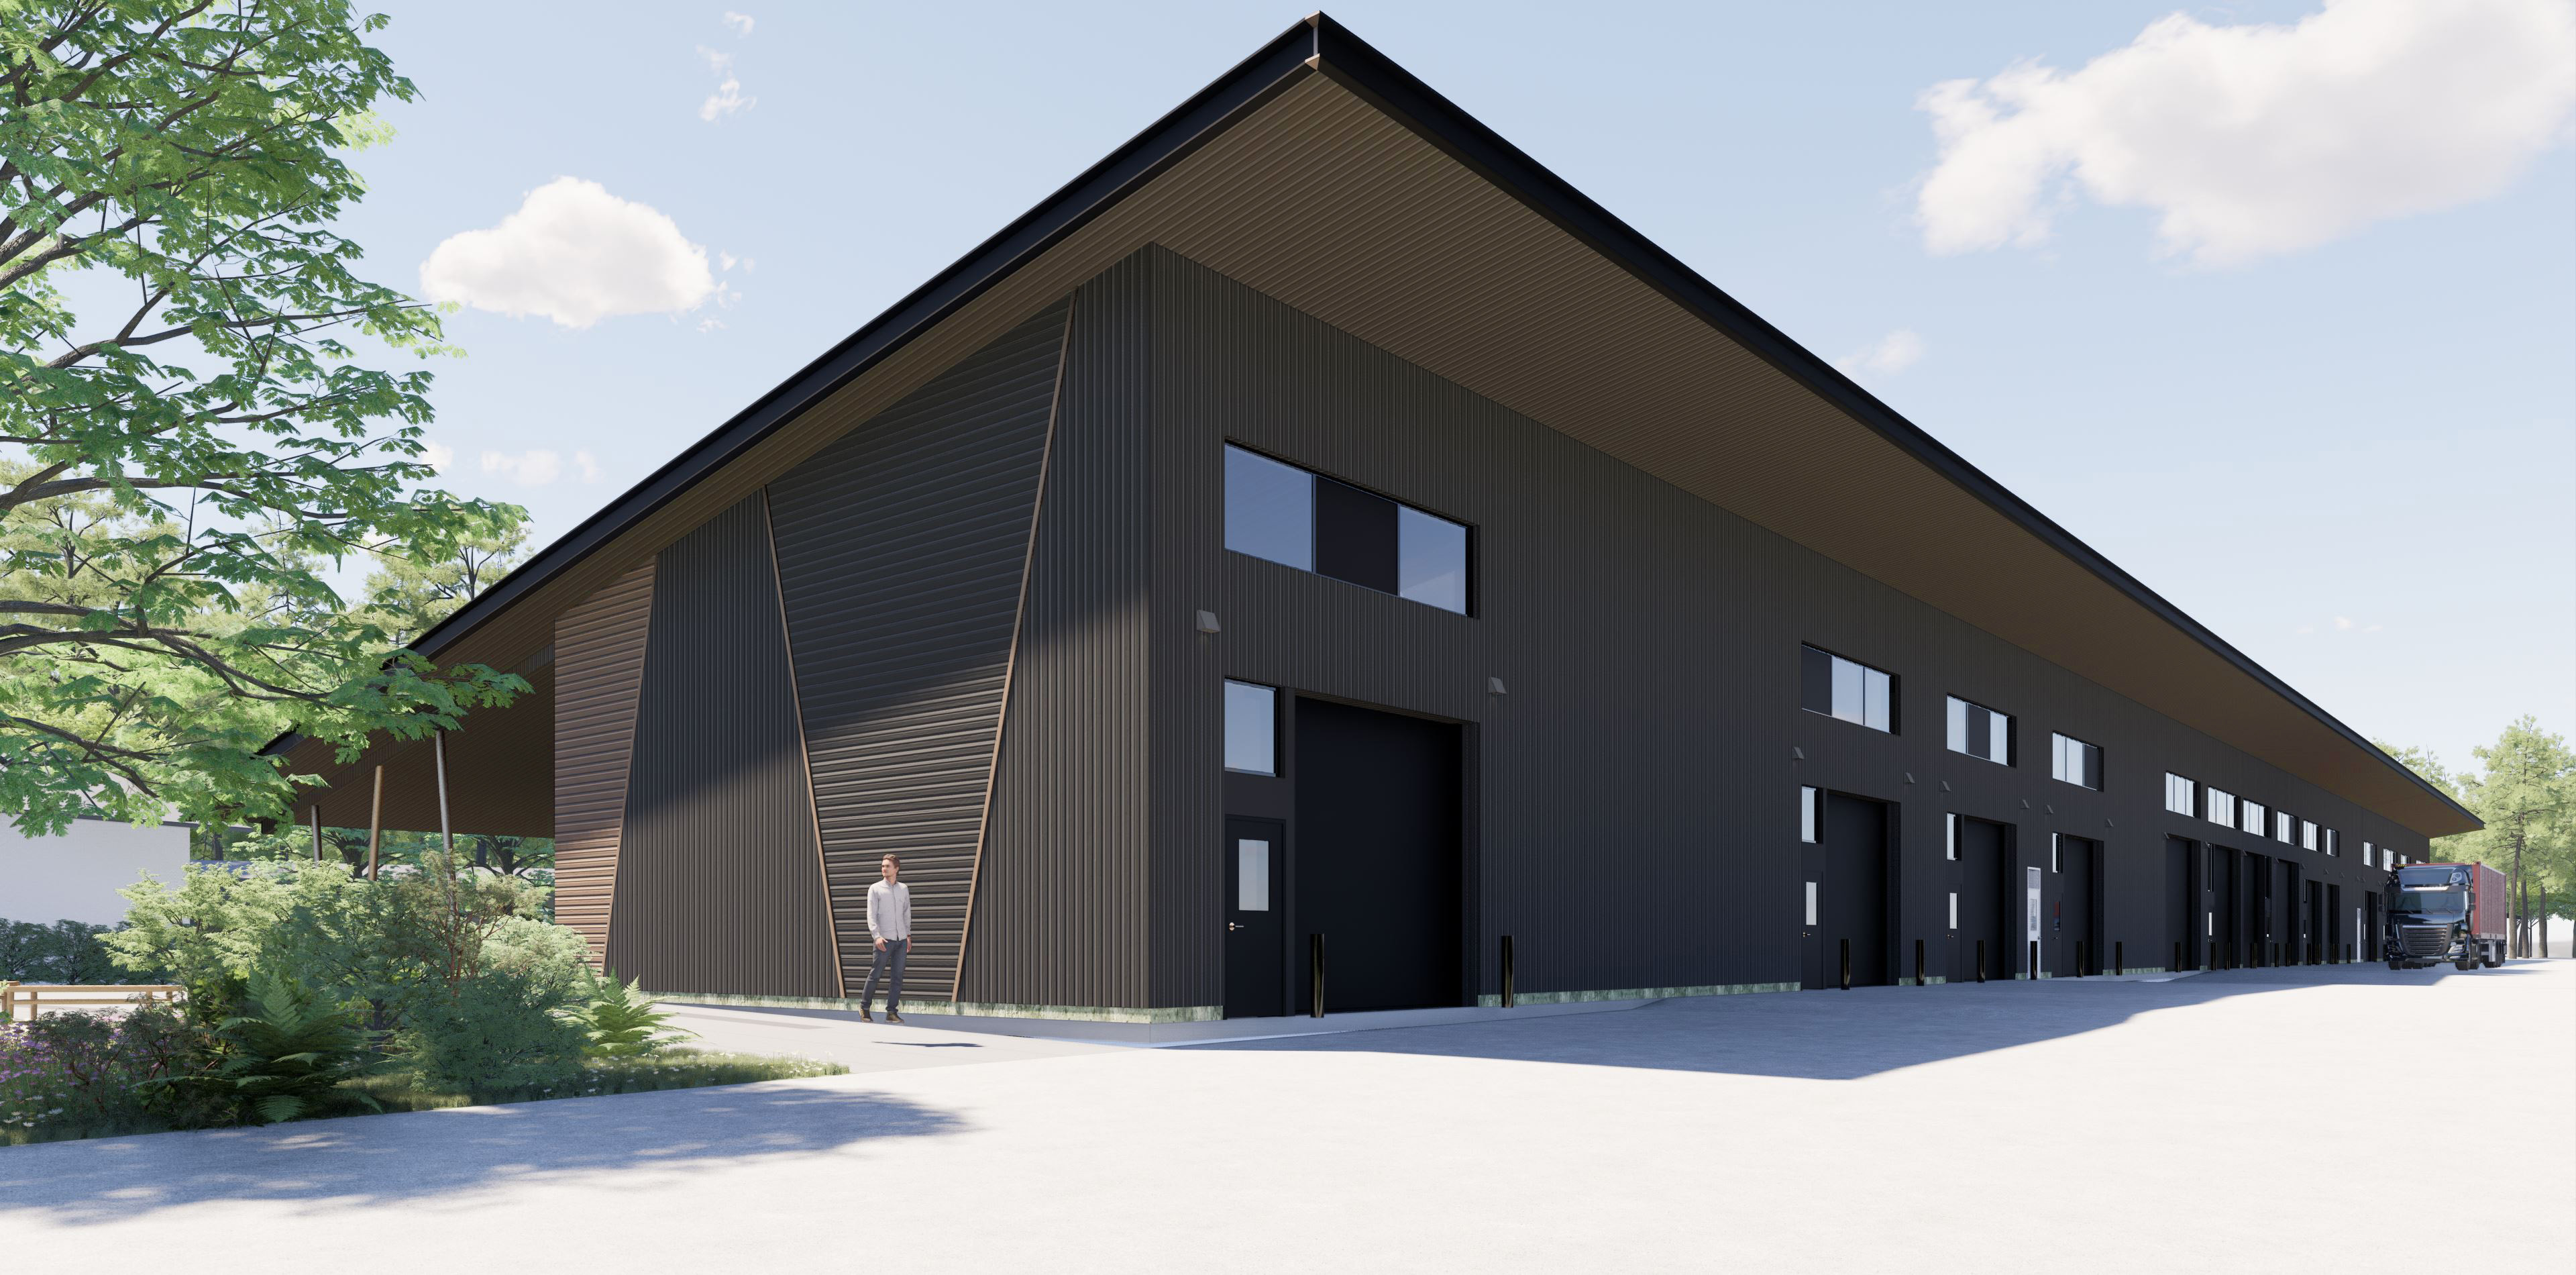 An artistic rendering of Acadia's new maintenance facility. This brown building has a slanted roof and several large bays for workshops, vehicle storage, etc